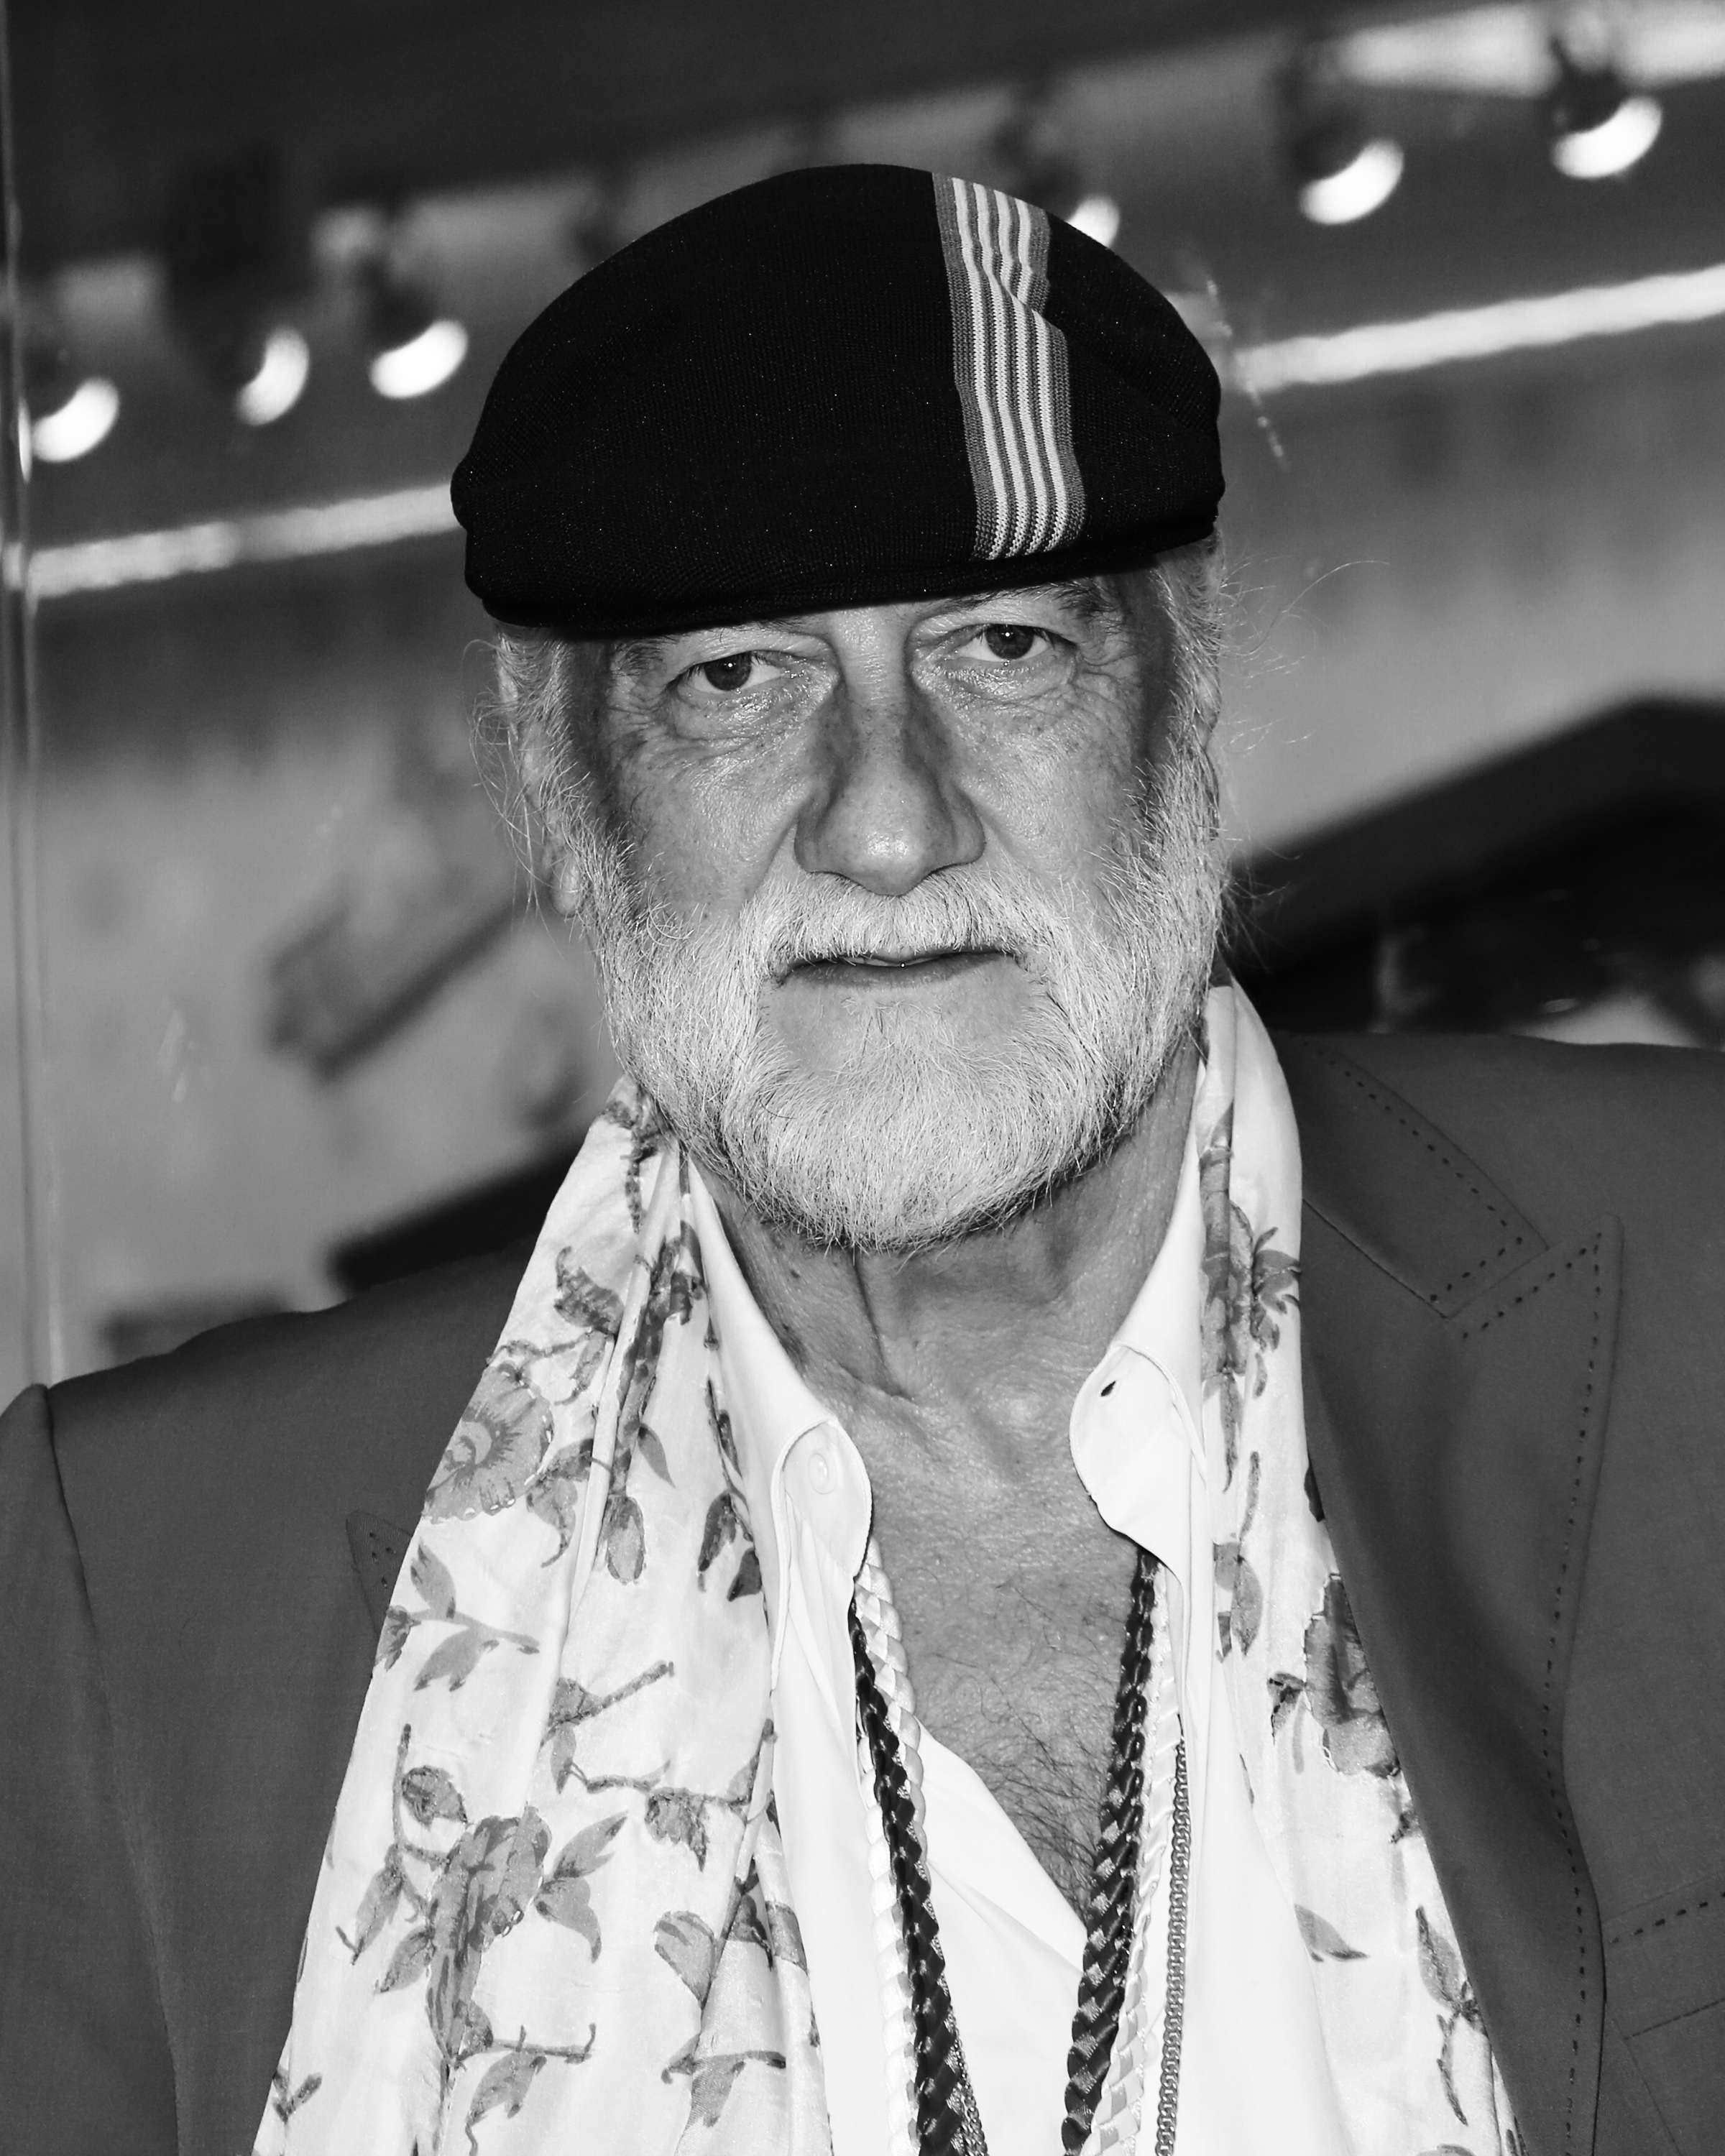 Mick Fleetwood Joins Jenny Boyd To Sign Copies Of Her Book "It's Not Only Rock 'N' Roll"